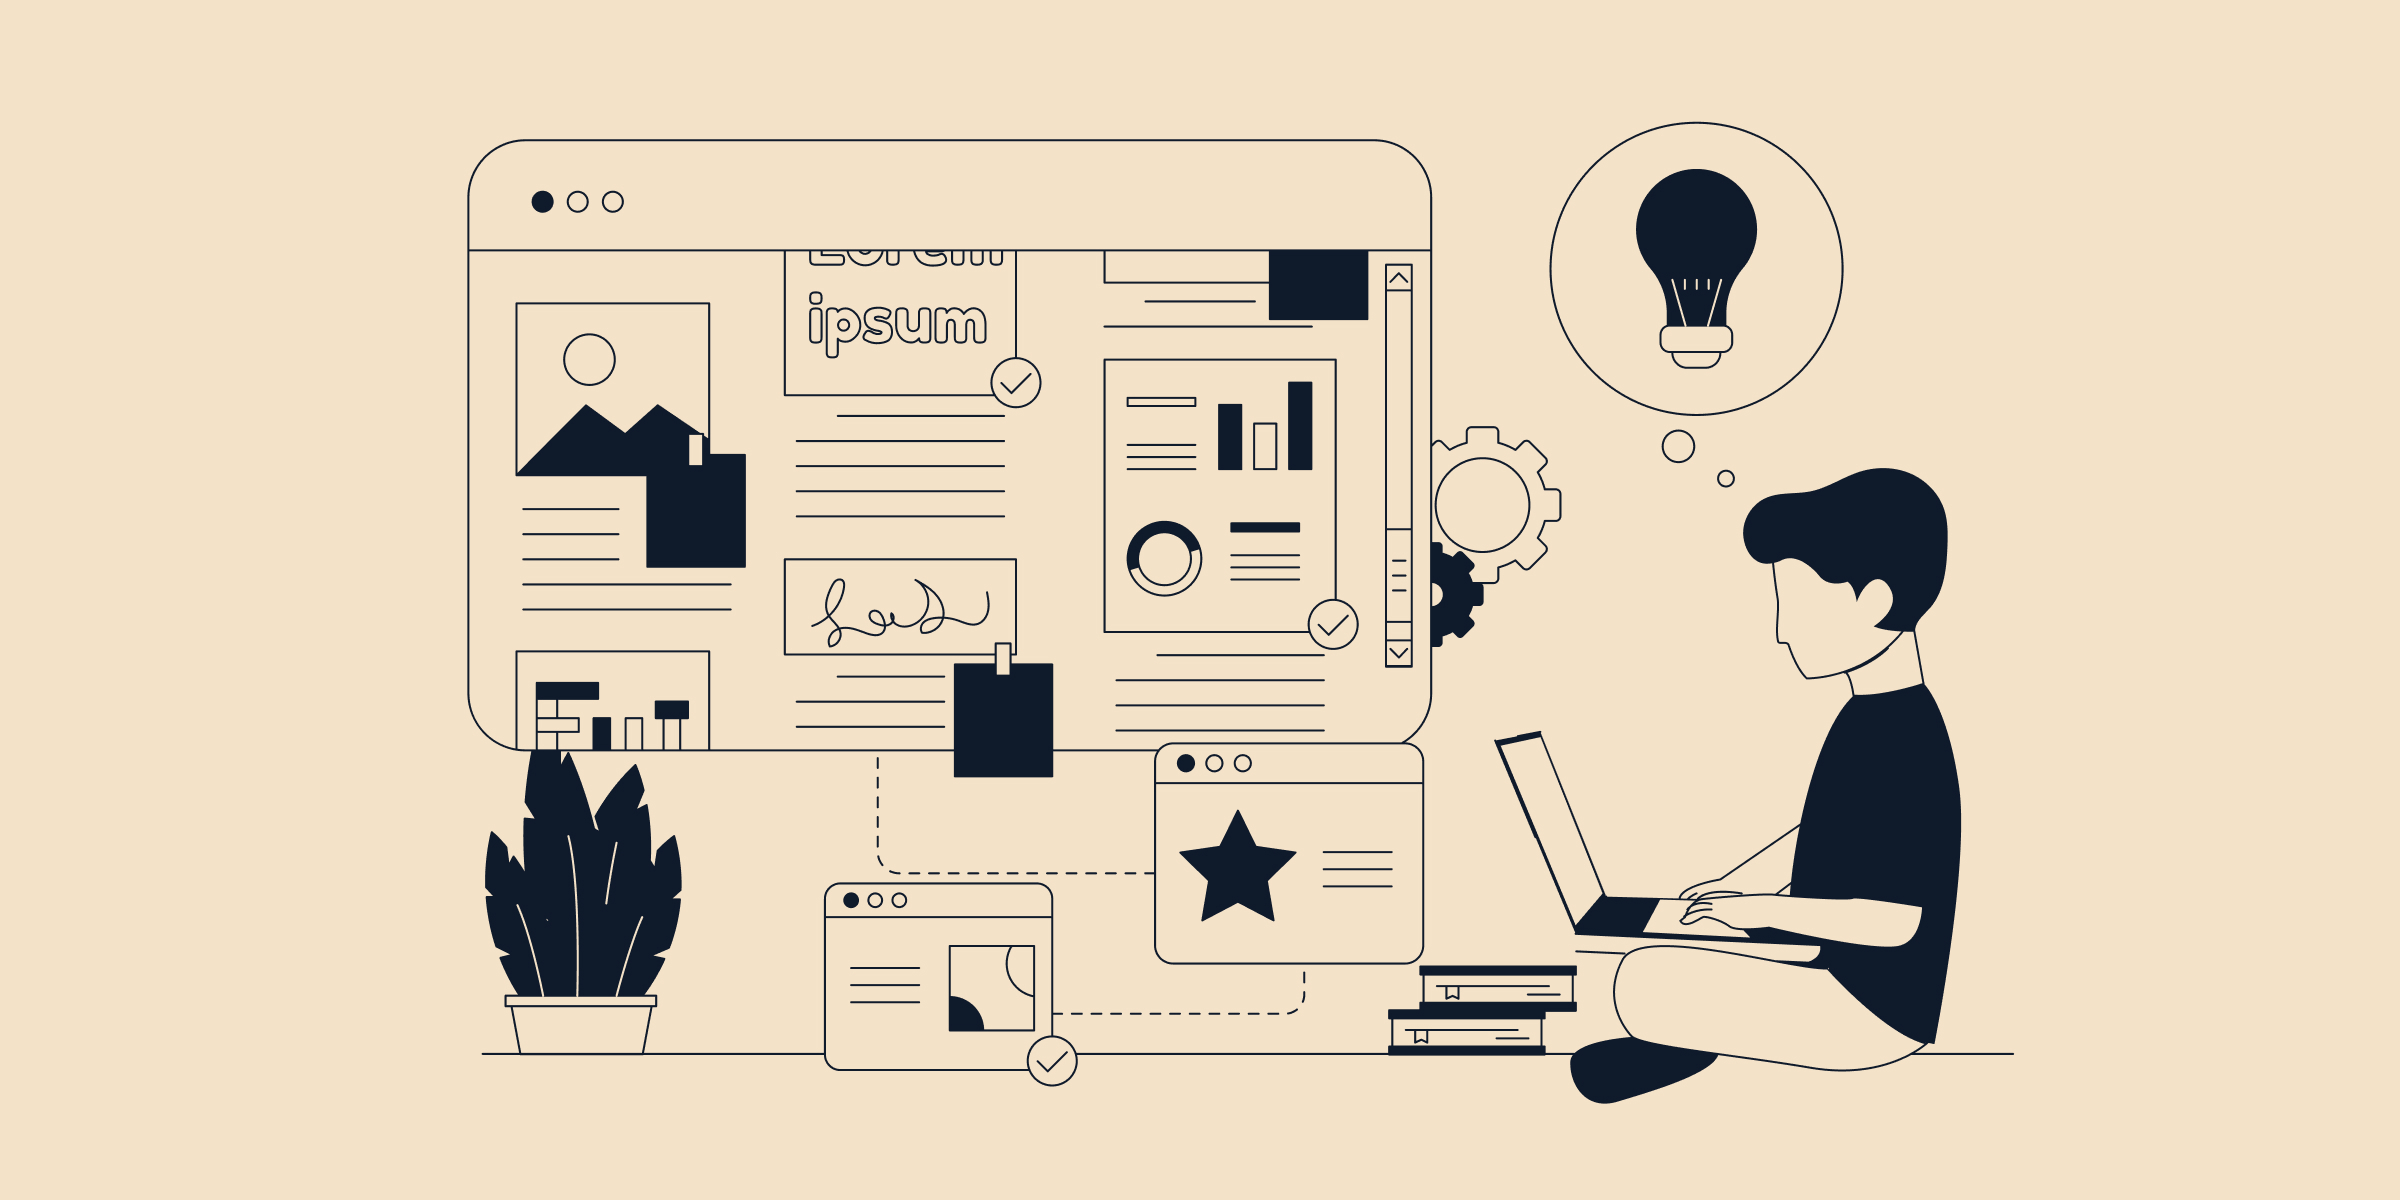 10 Most Important Web Design Trends for Small Business in 2023